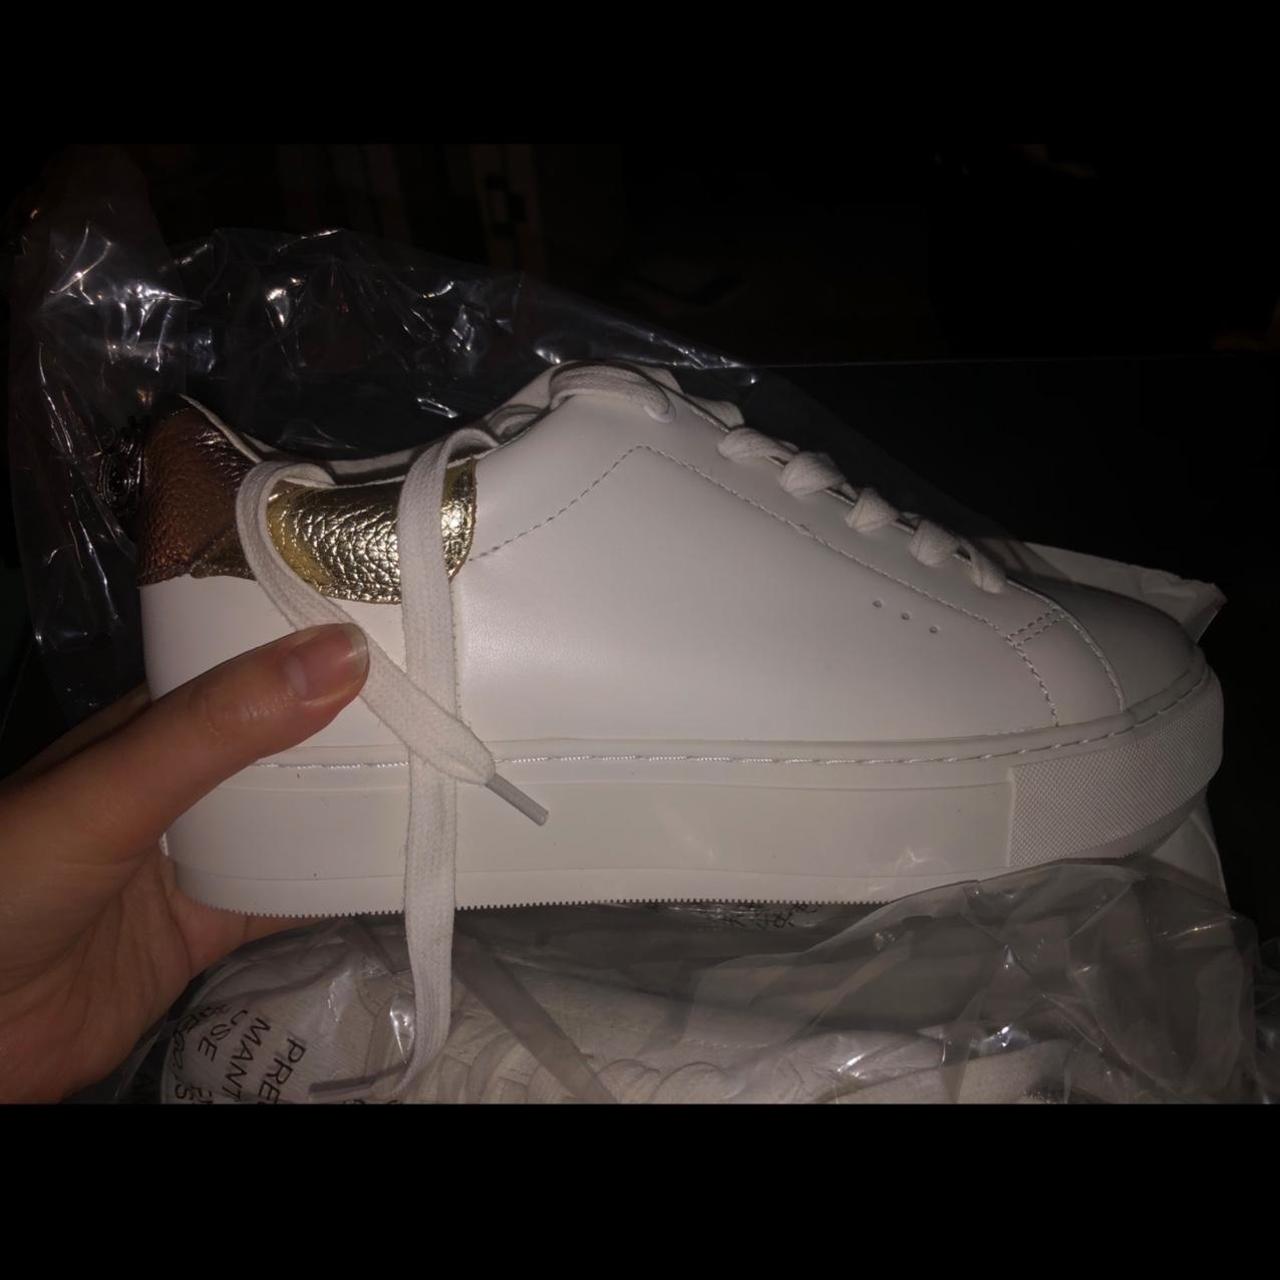 Kurt Geiger Women's White and Gold Trainers